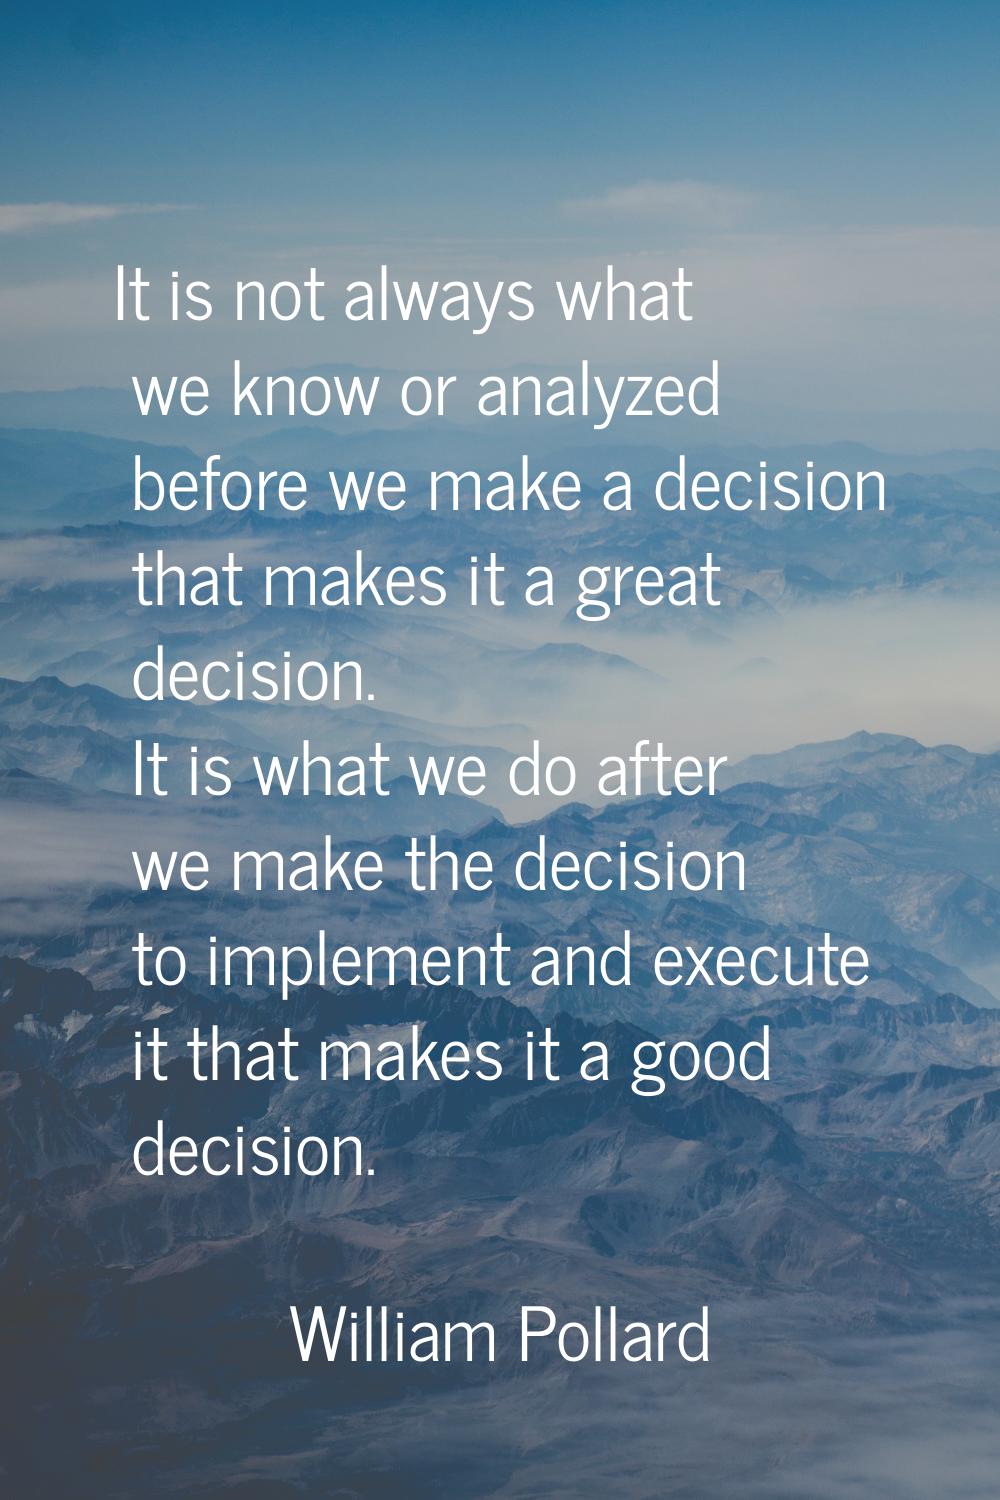 It is not always what we know or analyzed before we make a decision that makes it a great decision.